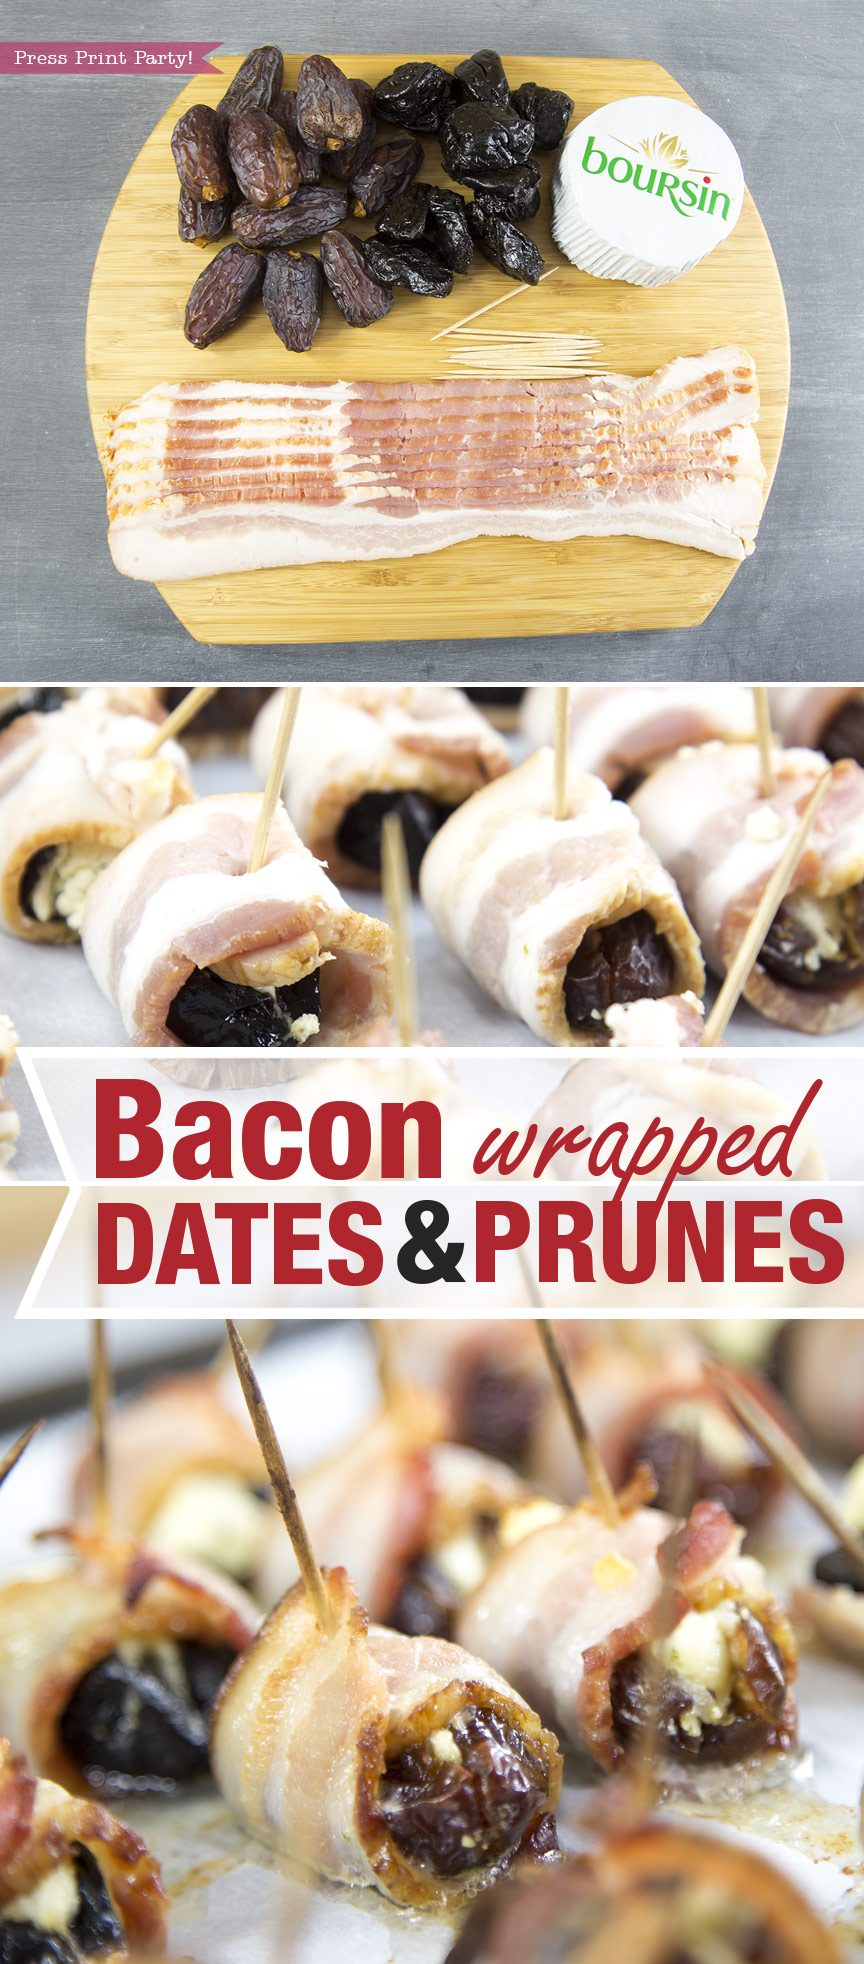 Bacon wrapped dates and prunes stuffed with Boursin - By Press Print Party!